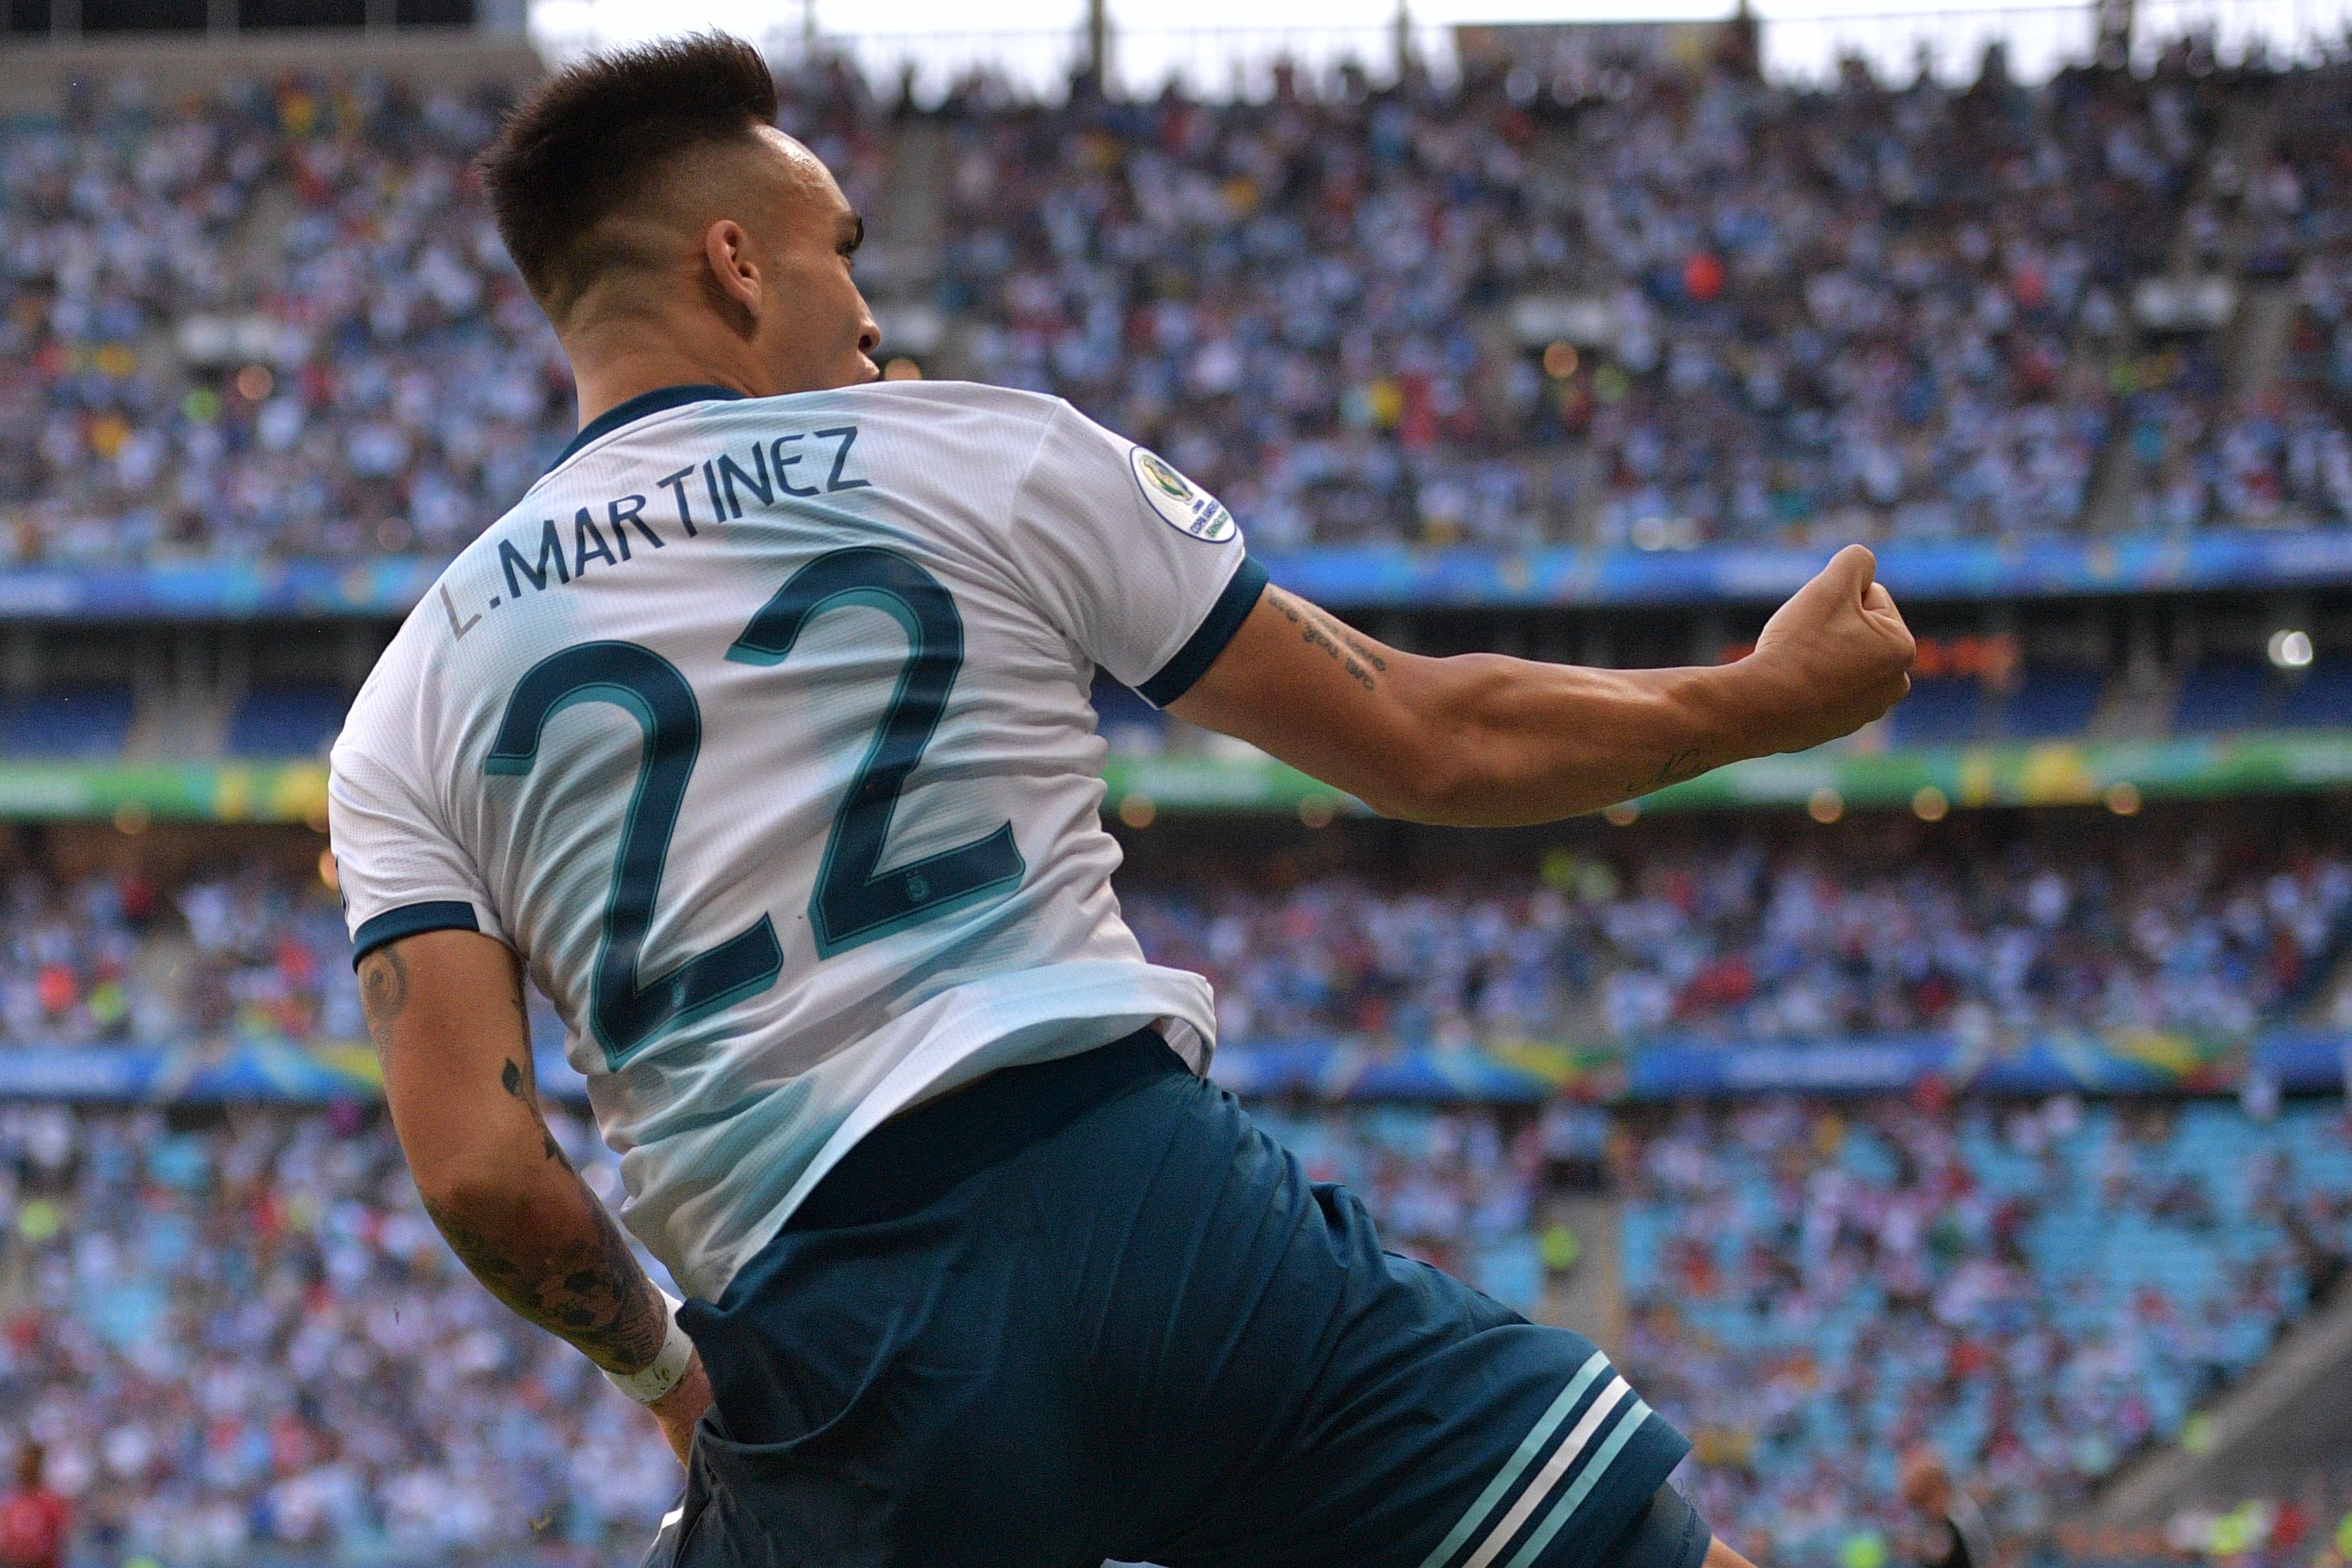 Will Lautaro Martinez deliver the goods for Argentina? (Photo by Carl de Souza/AFP/Getty Images)